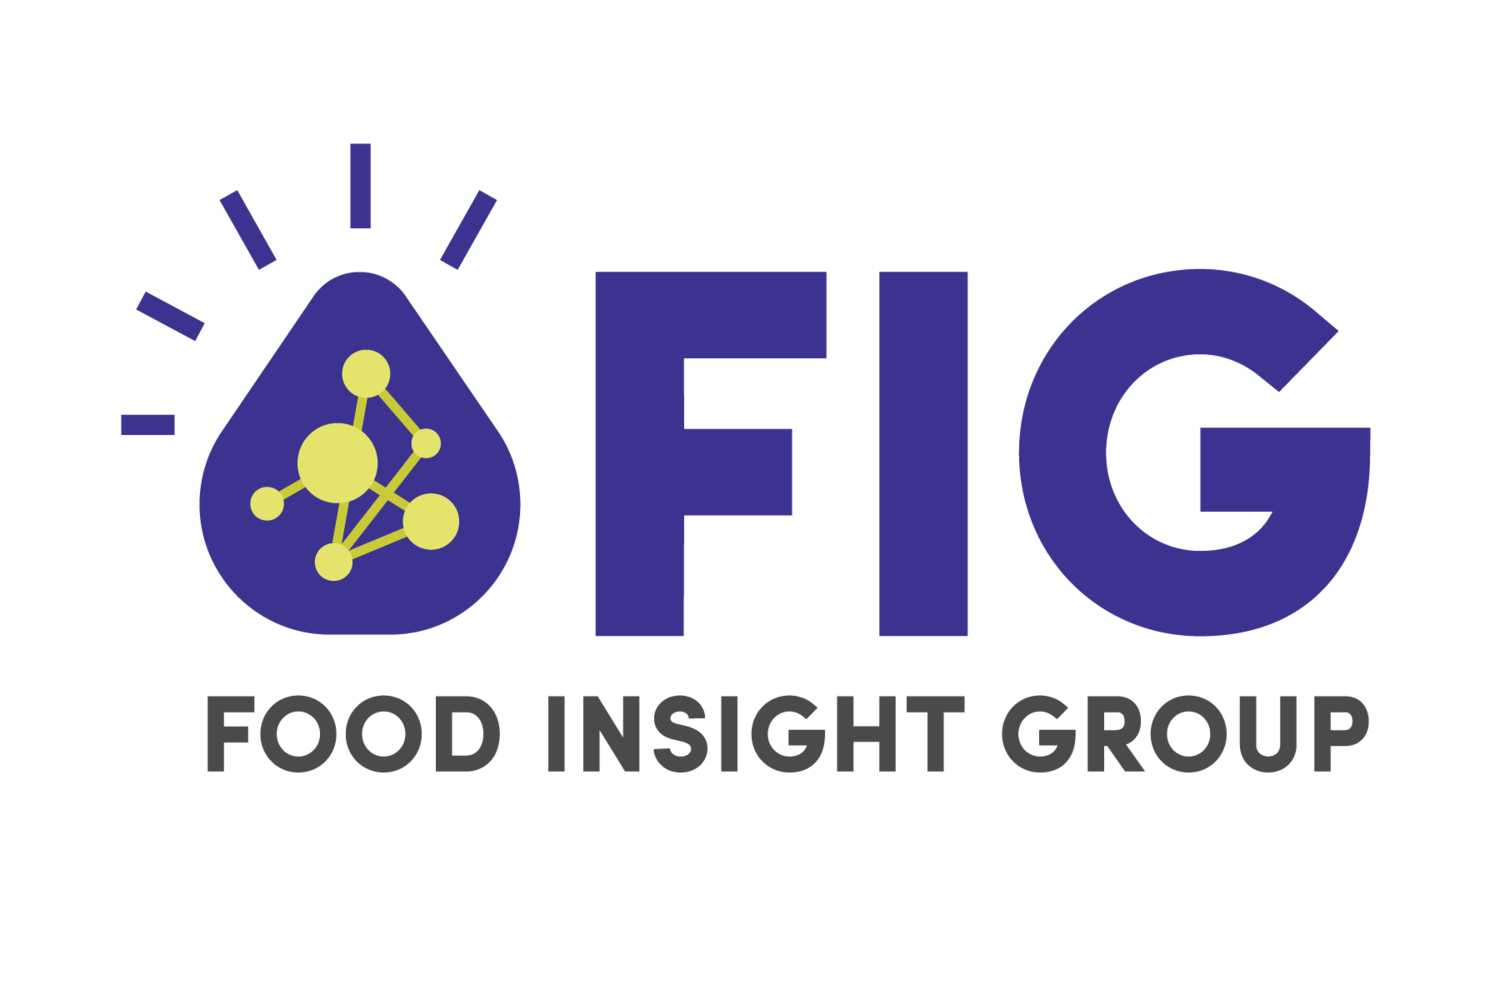 Food Insight Group